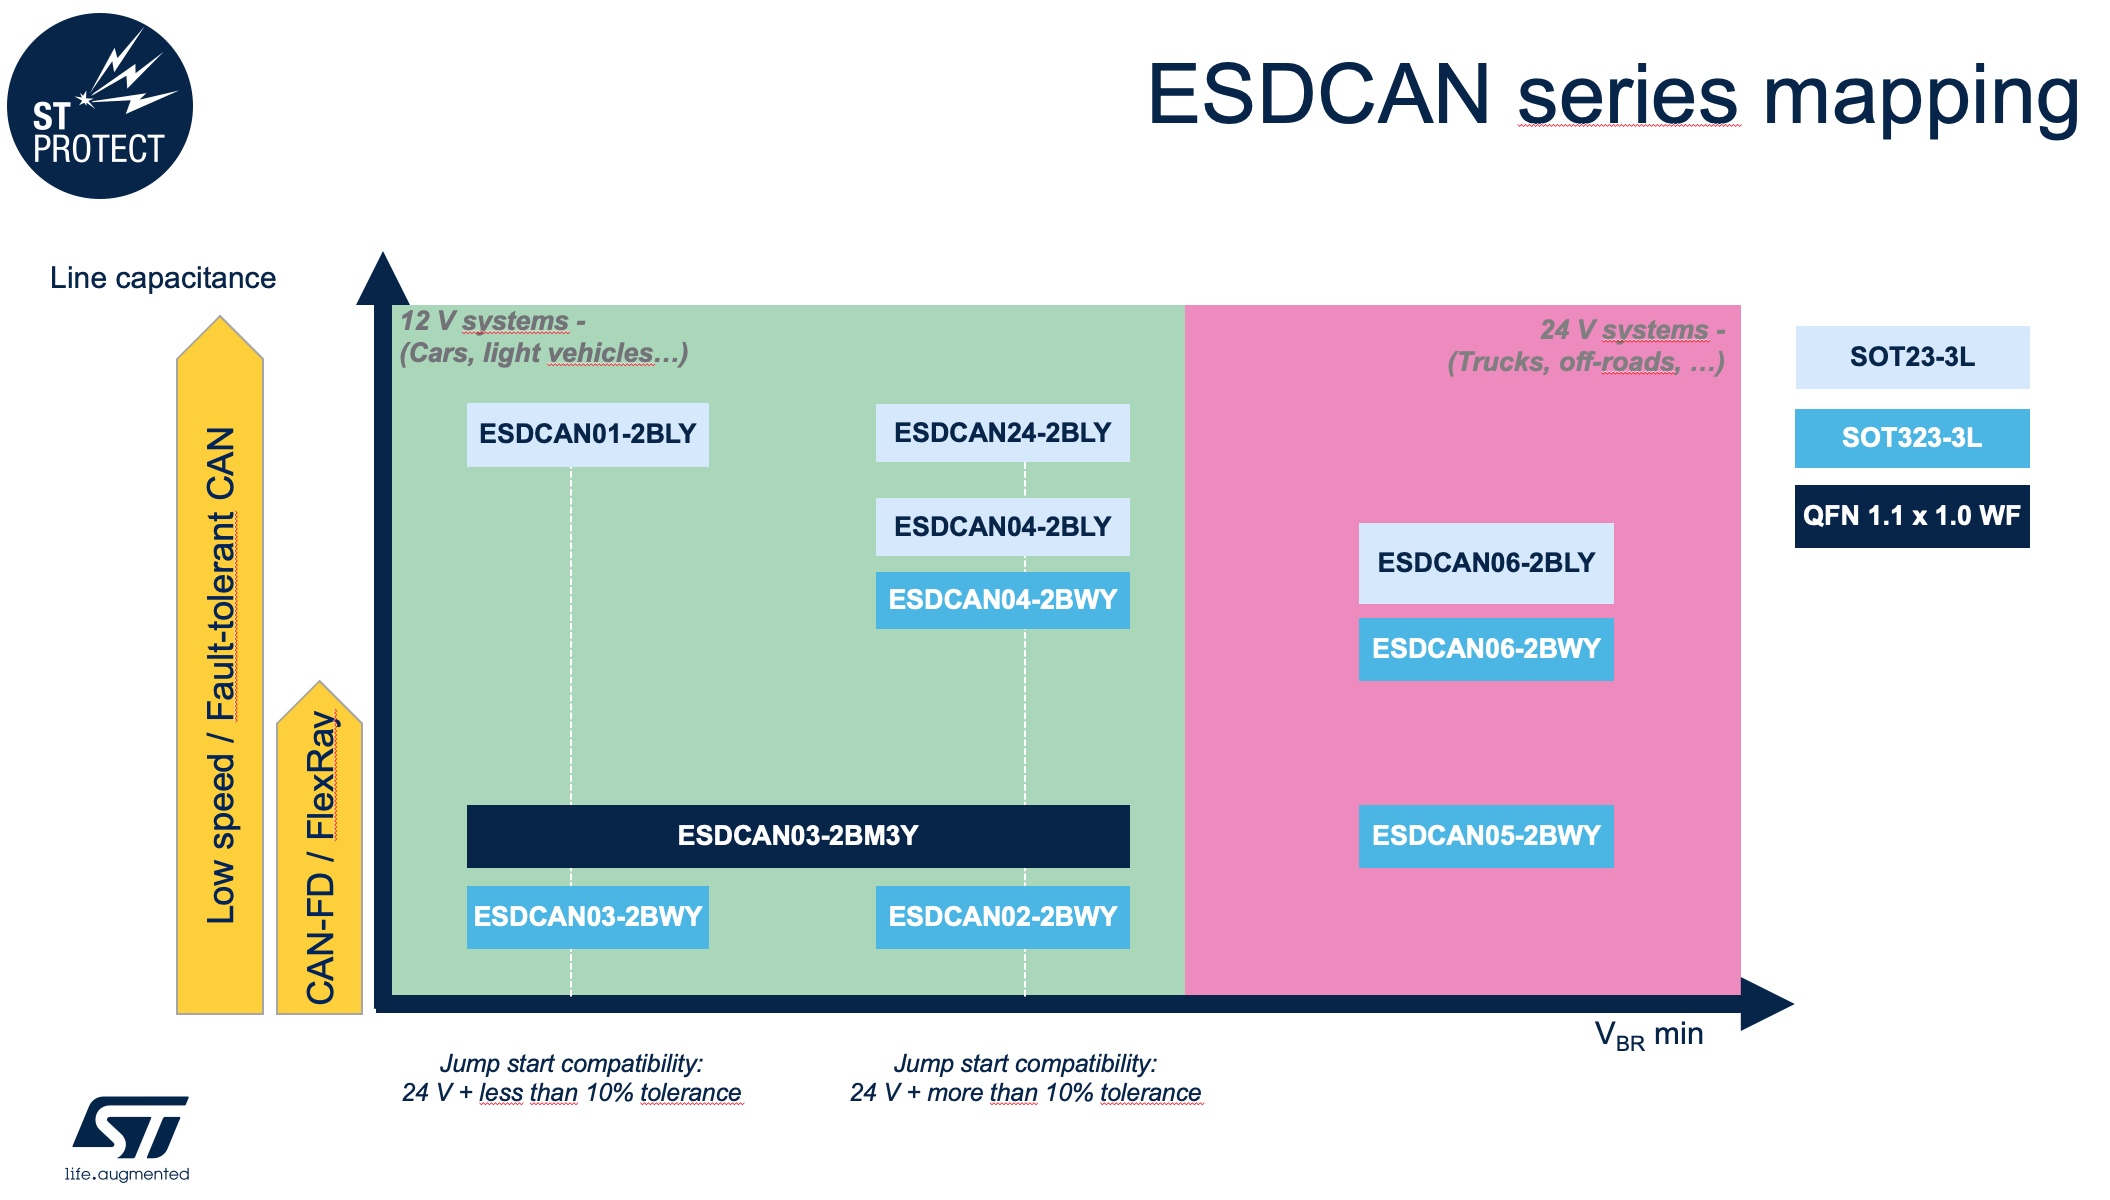 ESDCAN series mapping